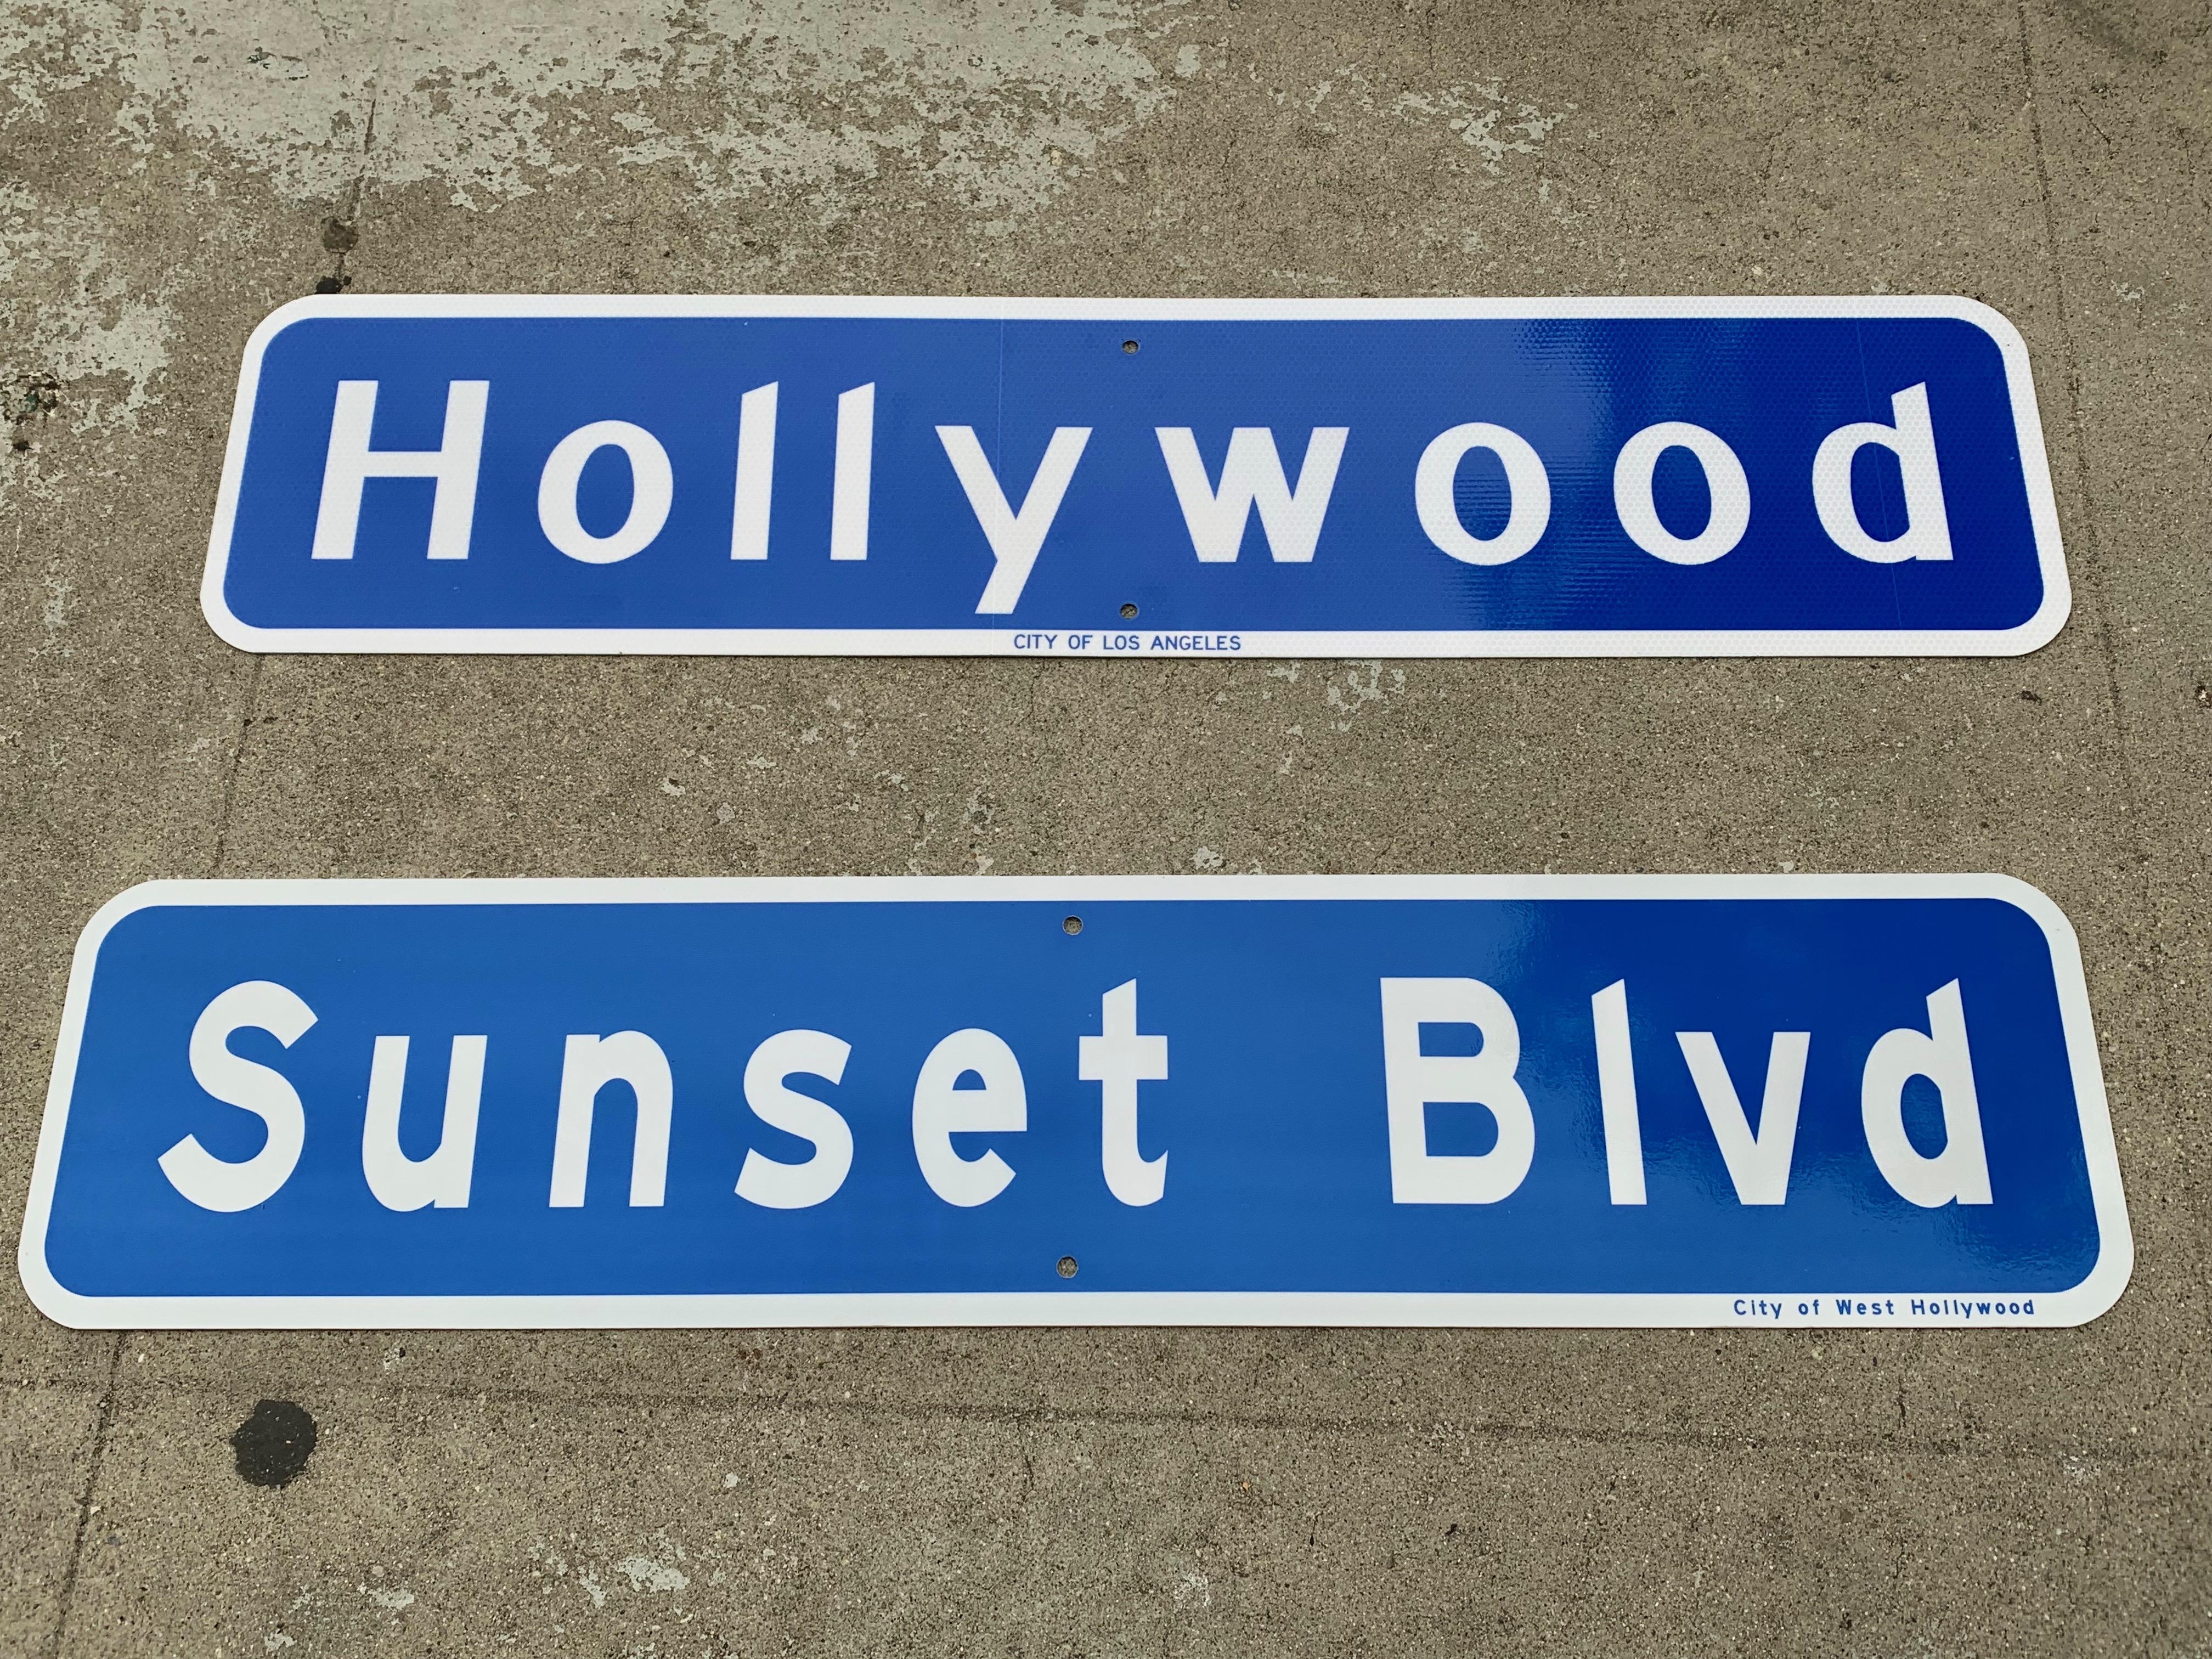 Very cool street sign from the city of Los Angeles. Hollywood blvd sign with white lettering on blue background. Extremely good condition. Marked city of Los Angeles on the front. 

  